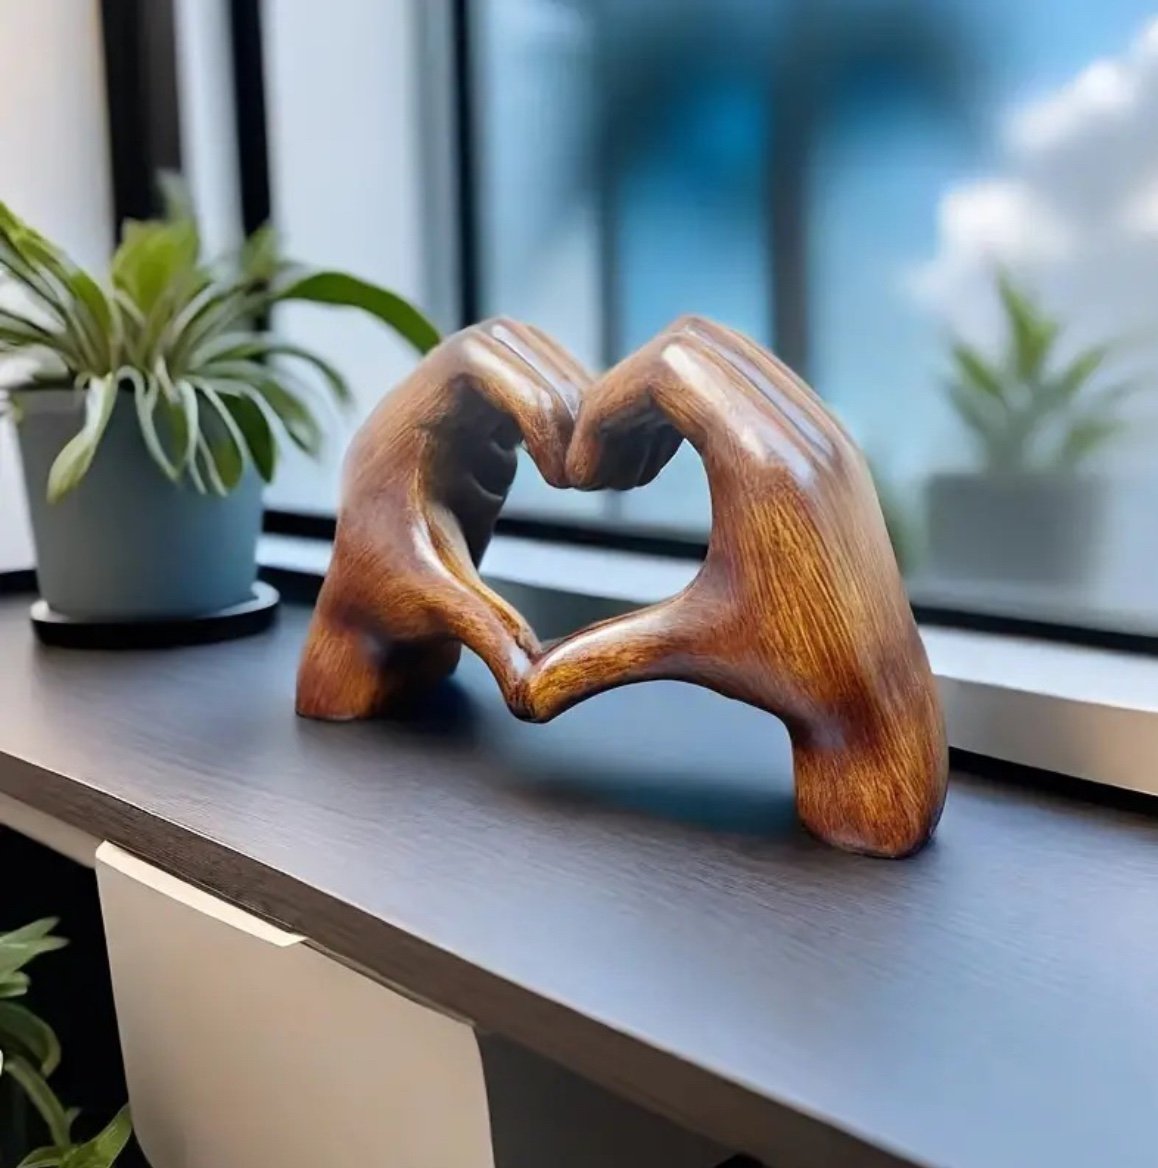 🔥Hot Sale-50%OFF💖Mother's Day Heart Statue